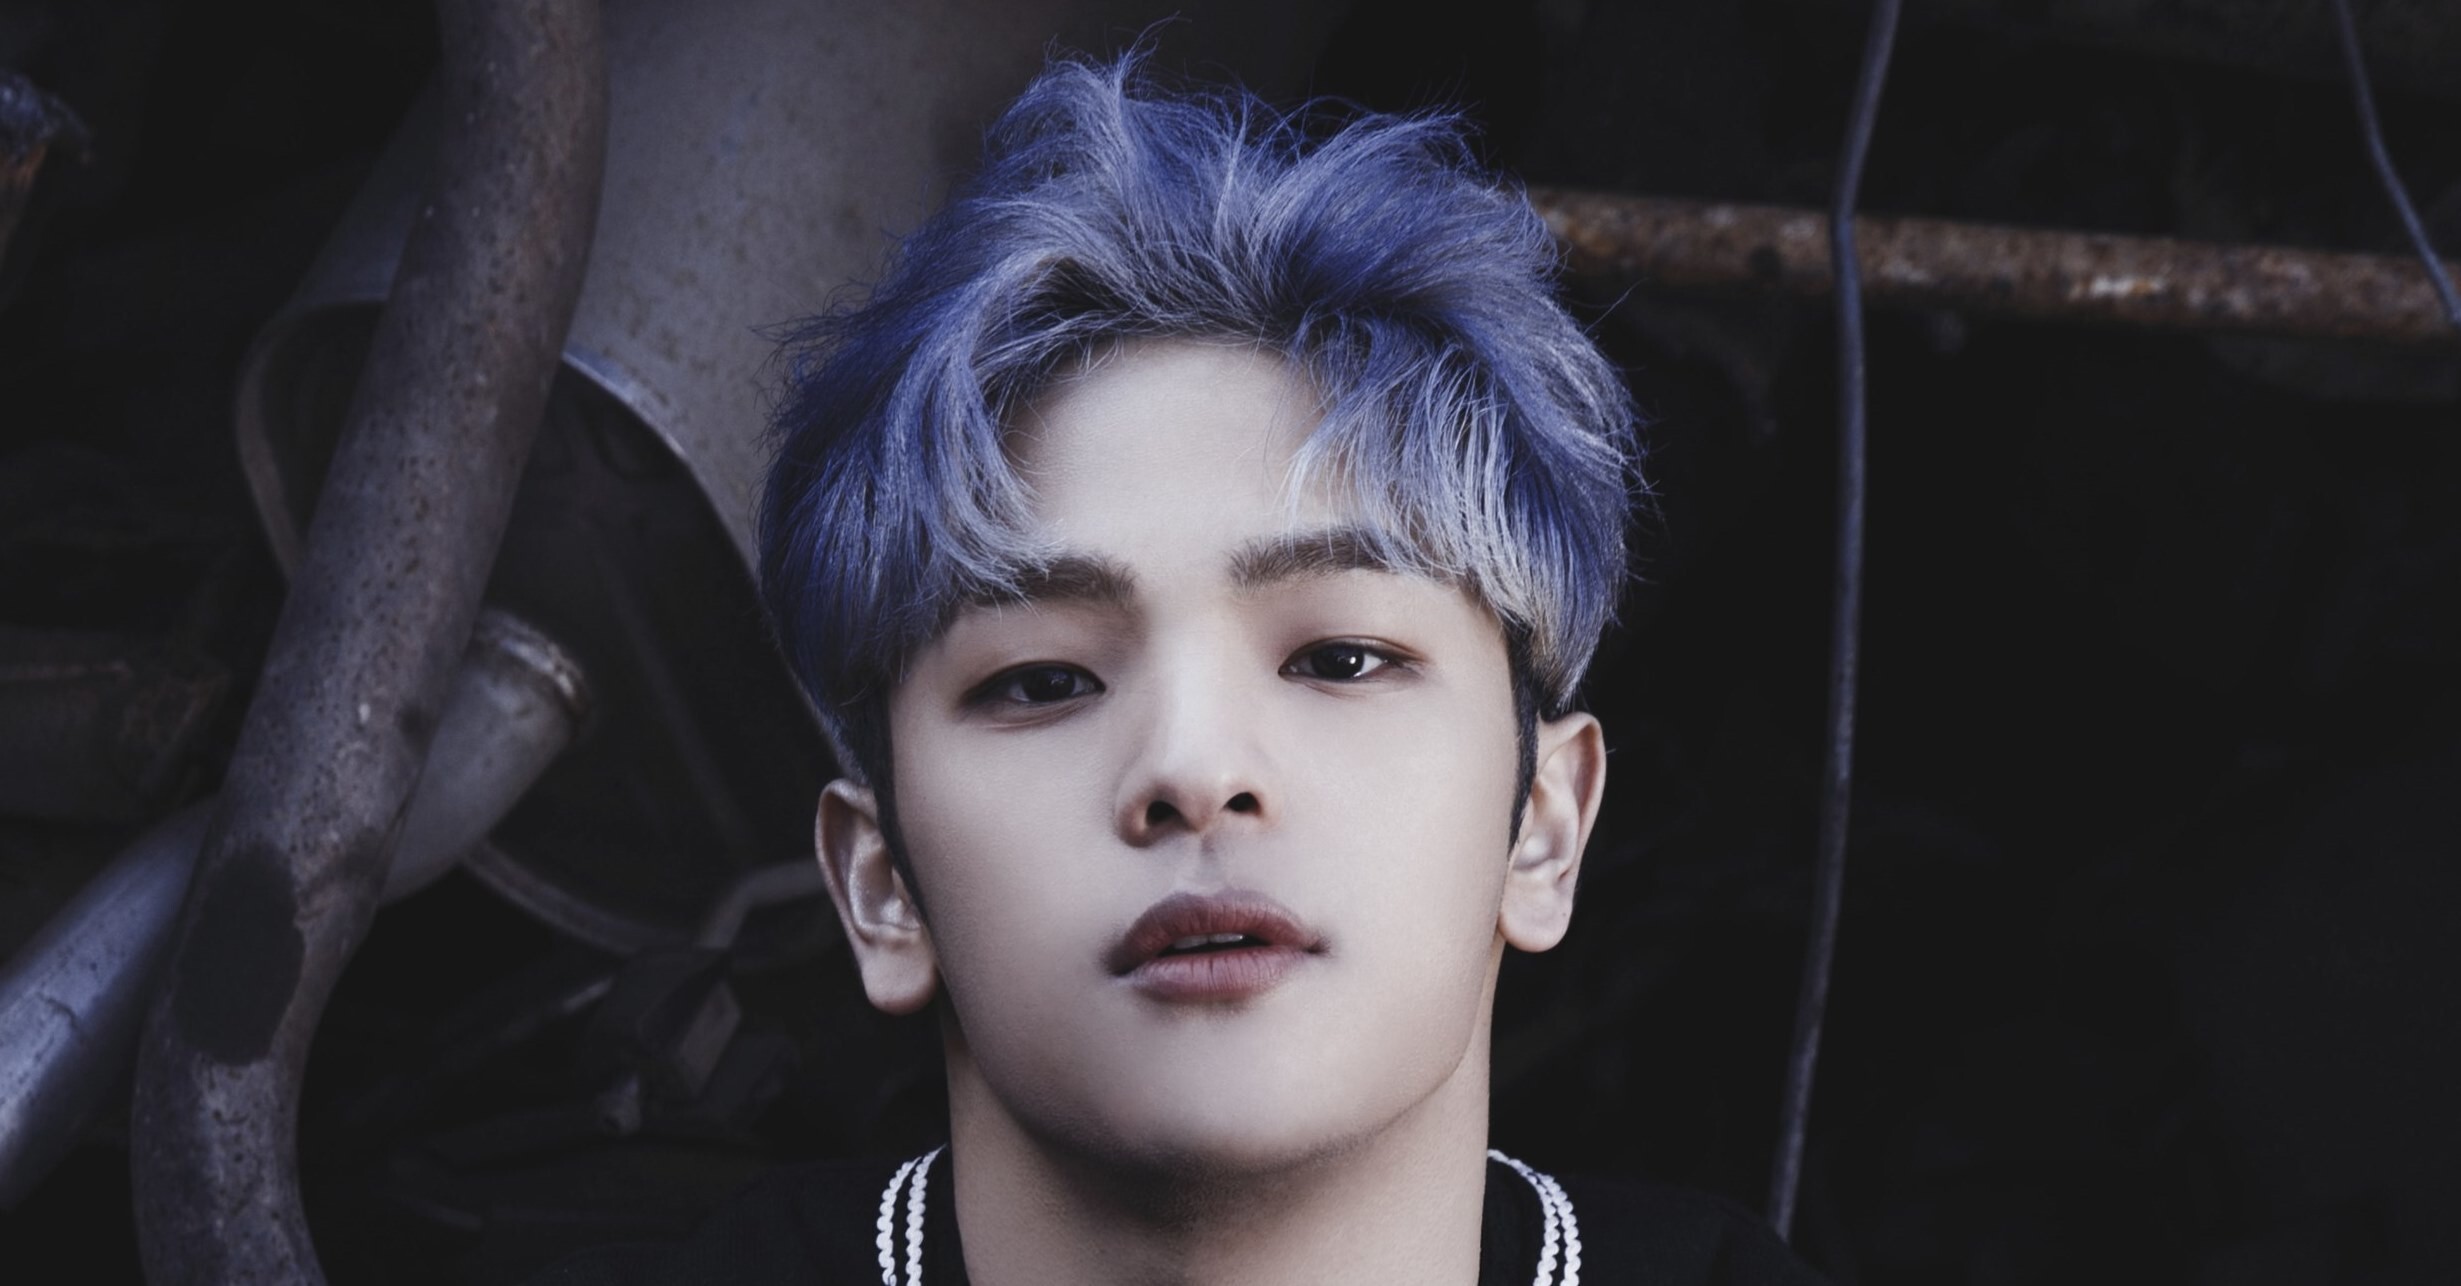 Woojin has angered internet users with his denial of sexual harassment, which they say was insensitive.